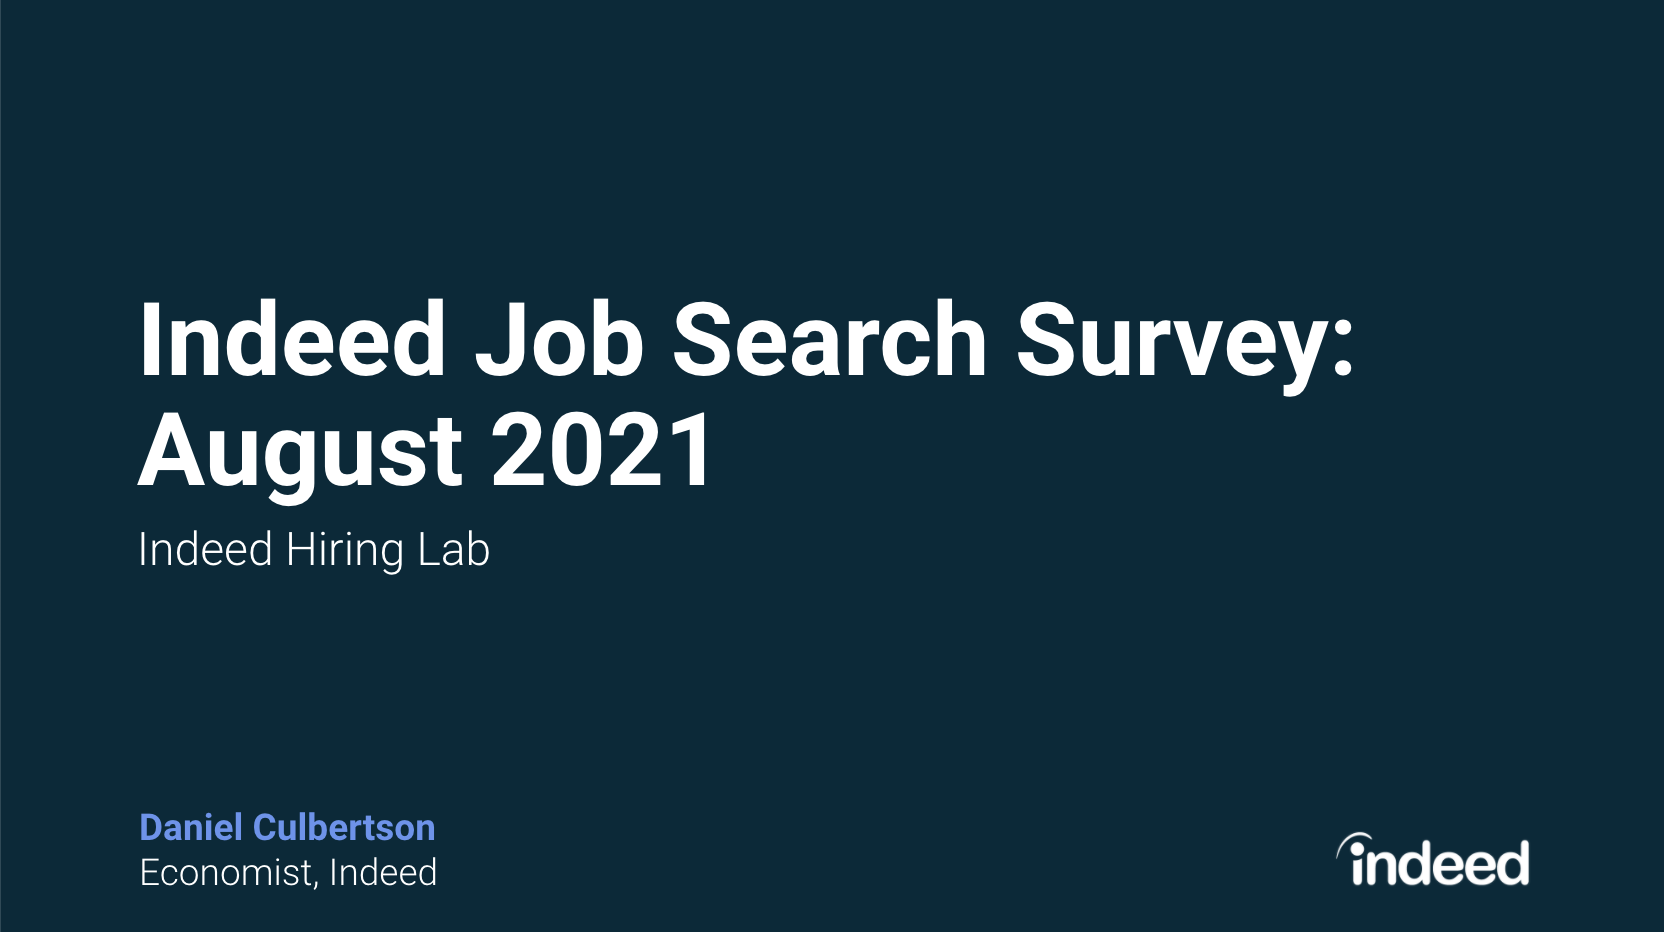 Intro slide with text saying "Indeed Job Search Survey: August 2021"